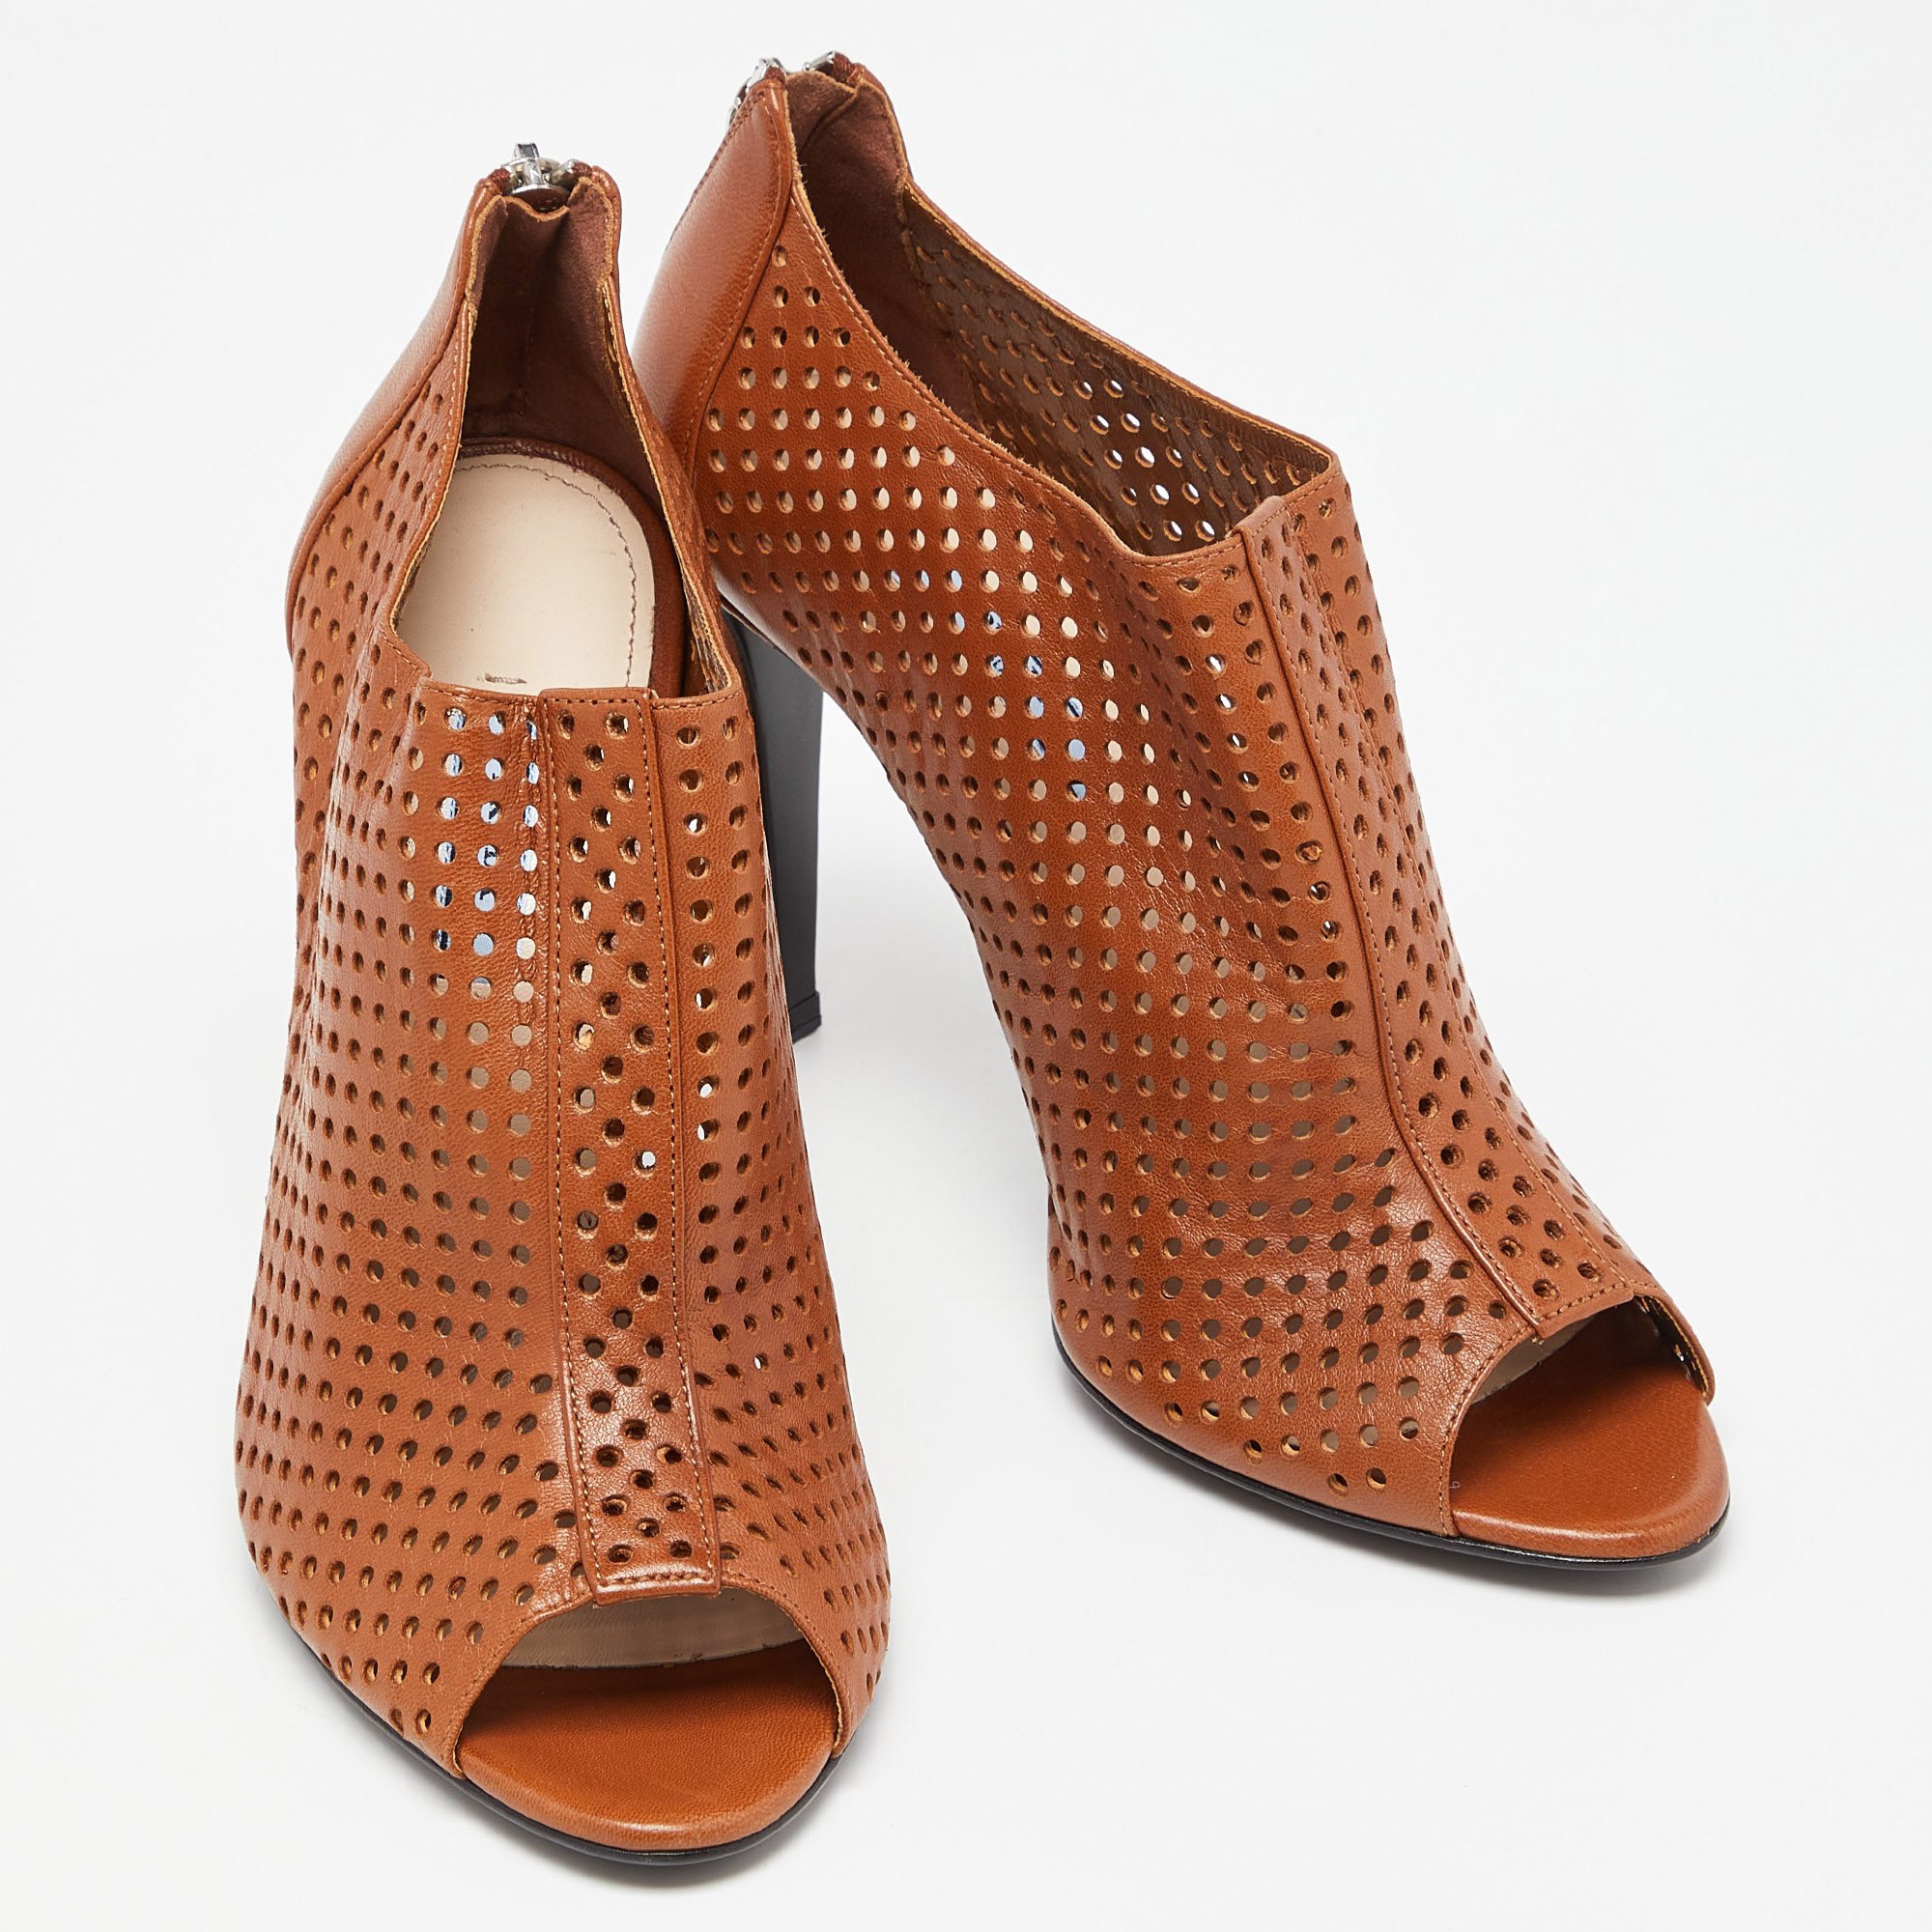 Prada Brown Perforated Leather Peep Toe Ankle Booties Size 39